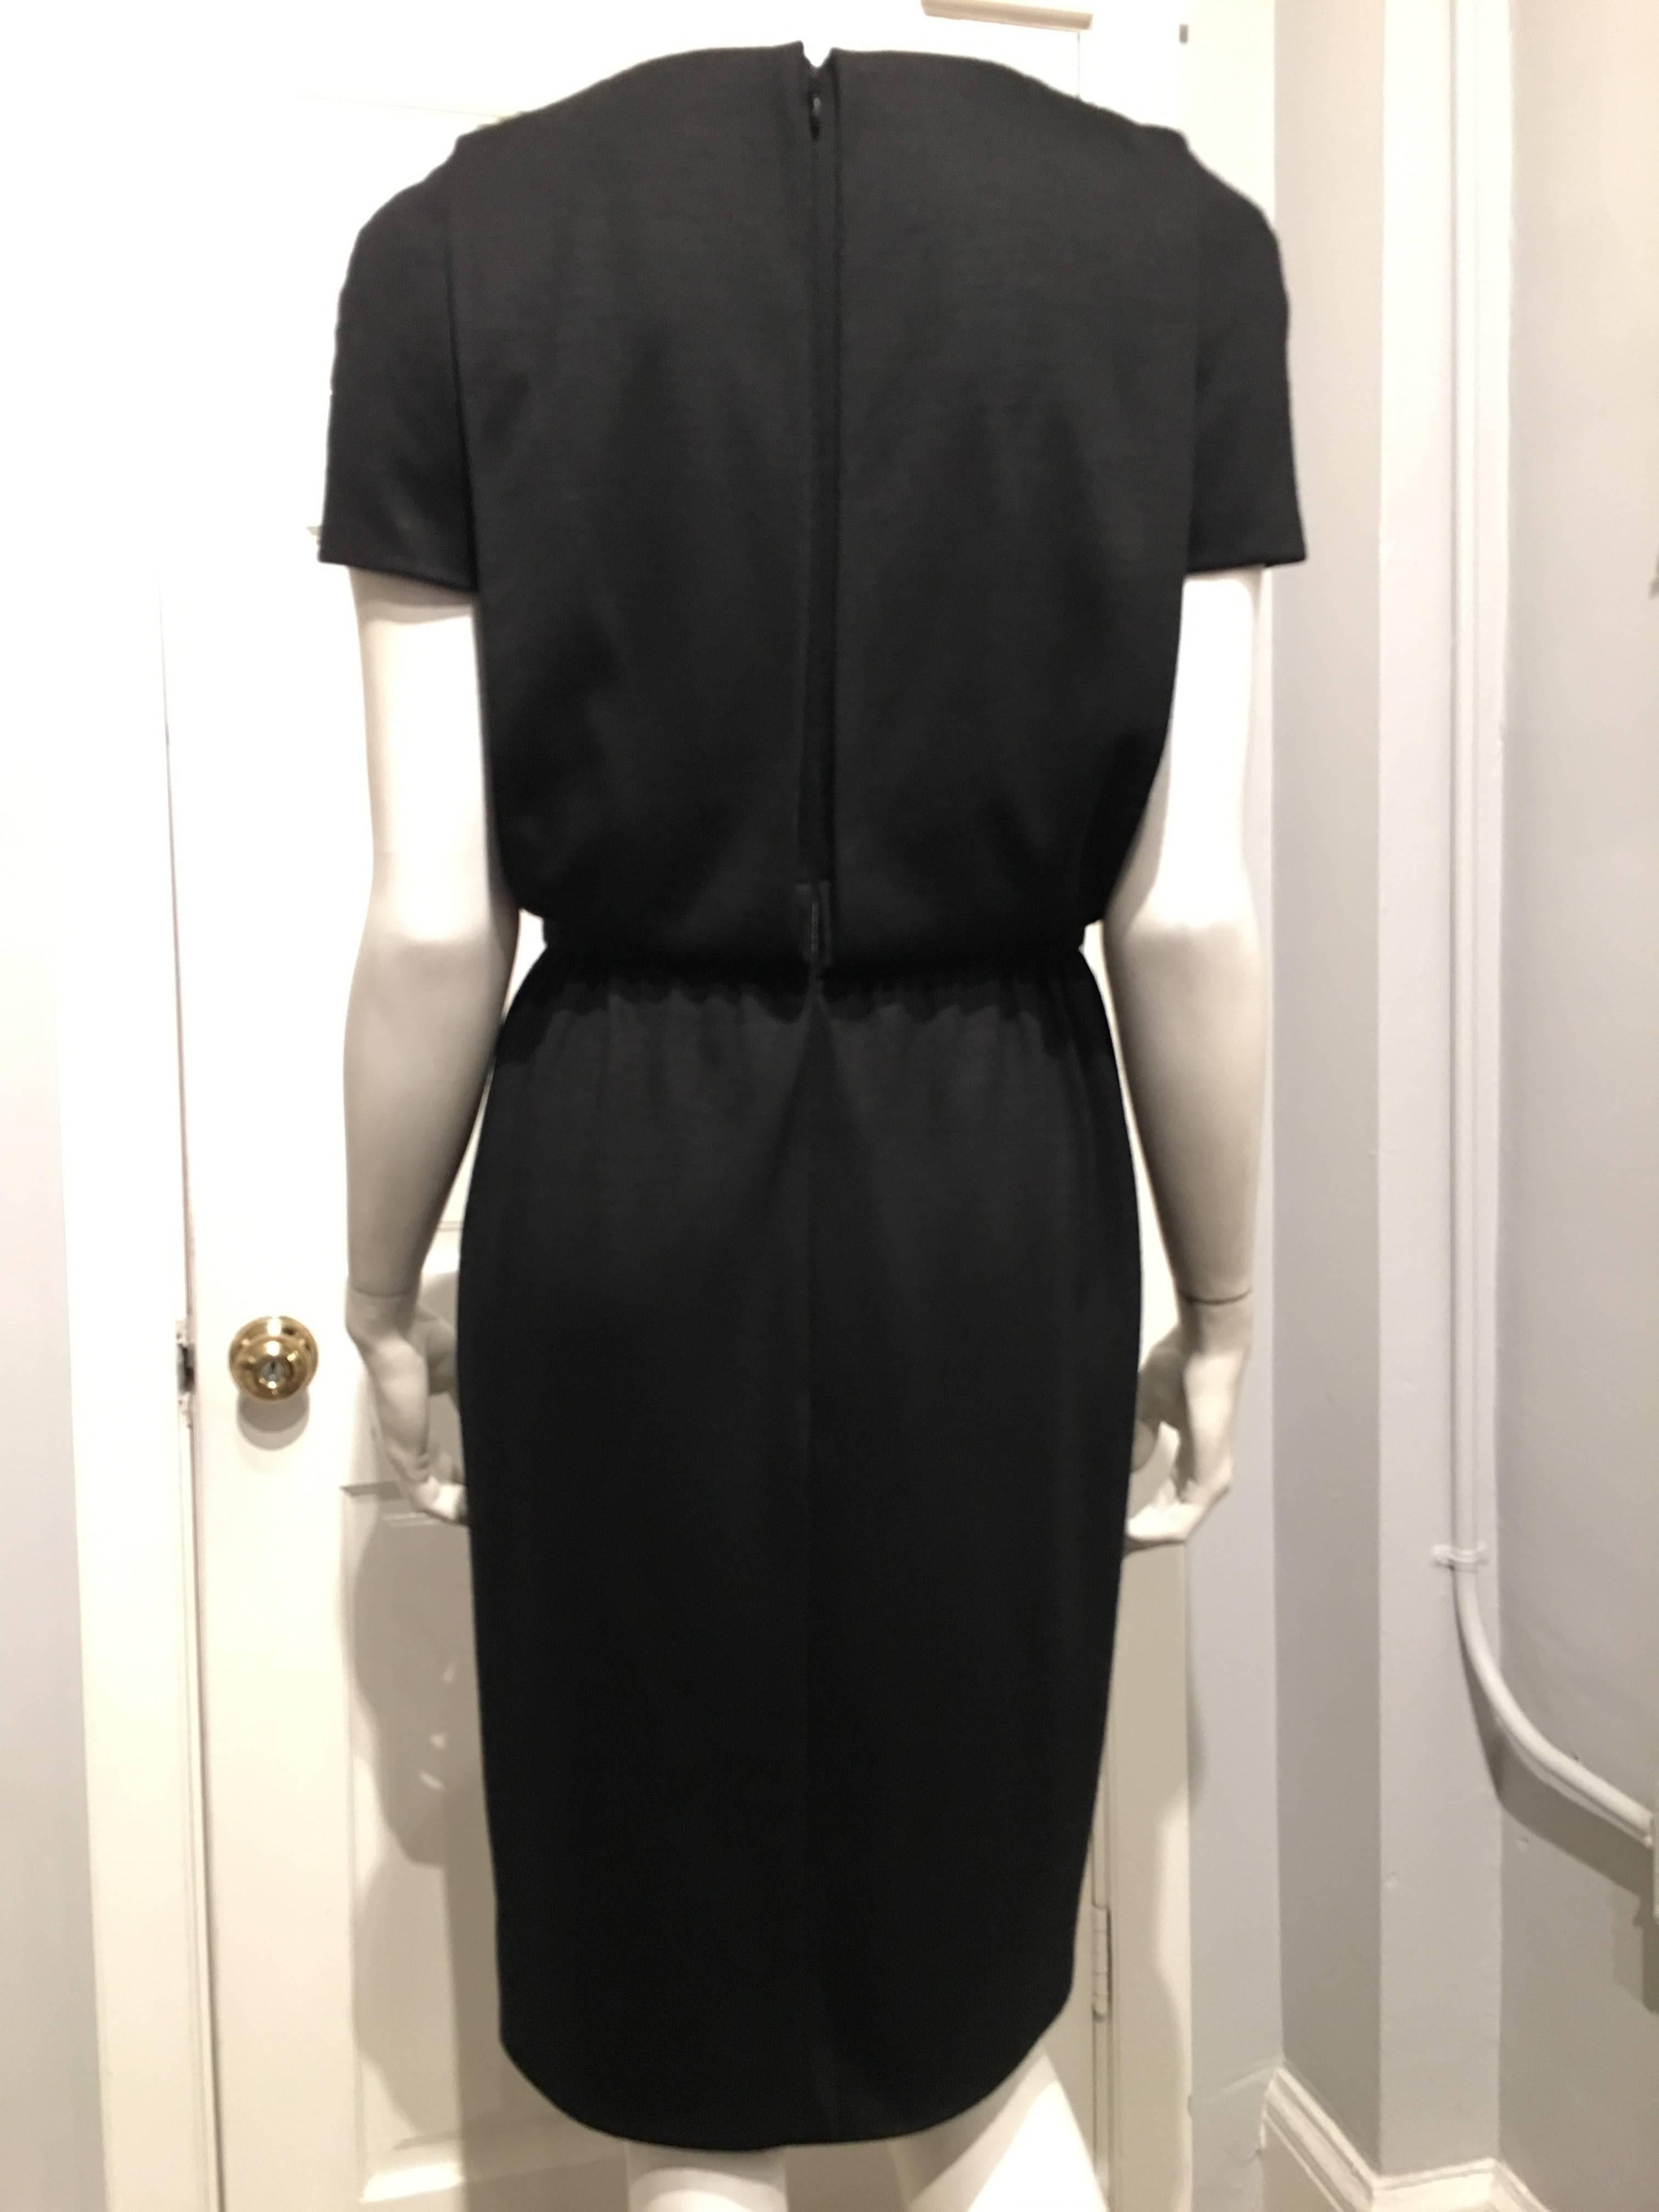 Women's Chanel Black Short-sleeved Wool Dress With Gripoix Buttons Sz 38 (Us 6) For Sale